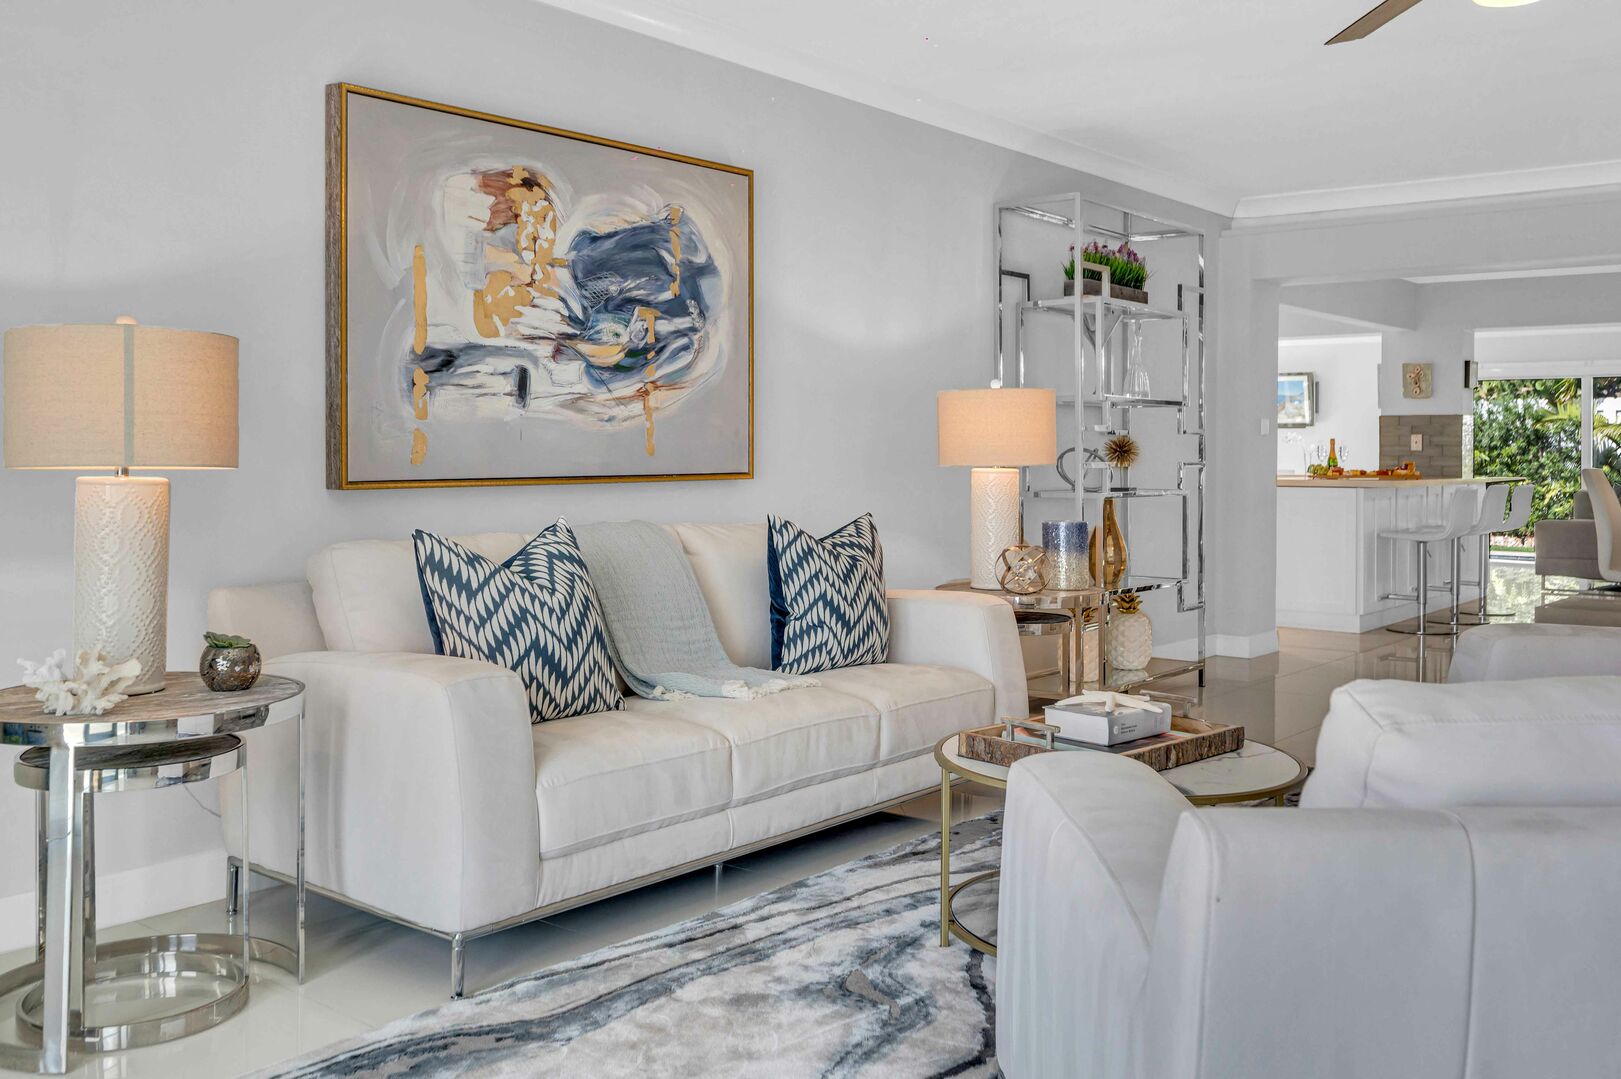 The sitting area is decorated with artistic pieces that complements the clean and beachy aesthetic of Ocean Mist Key.